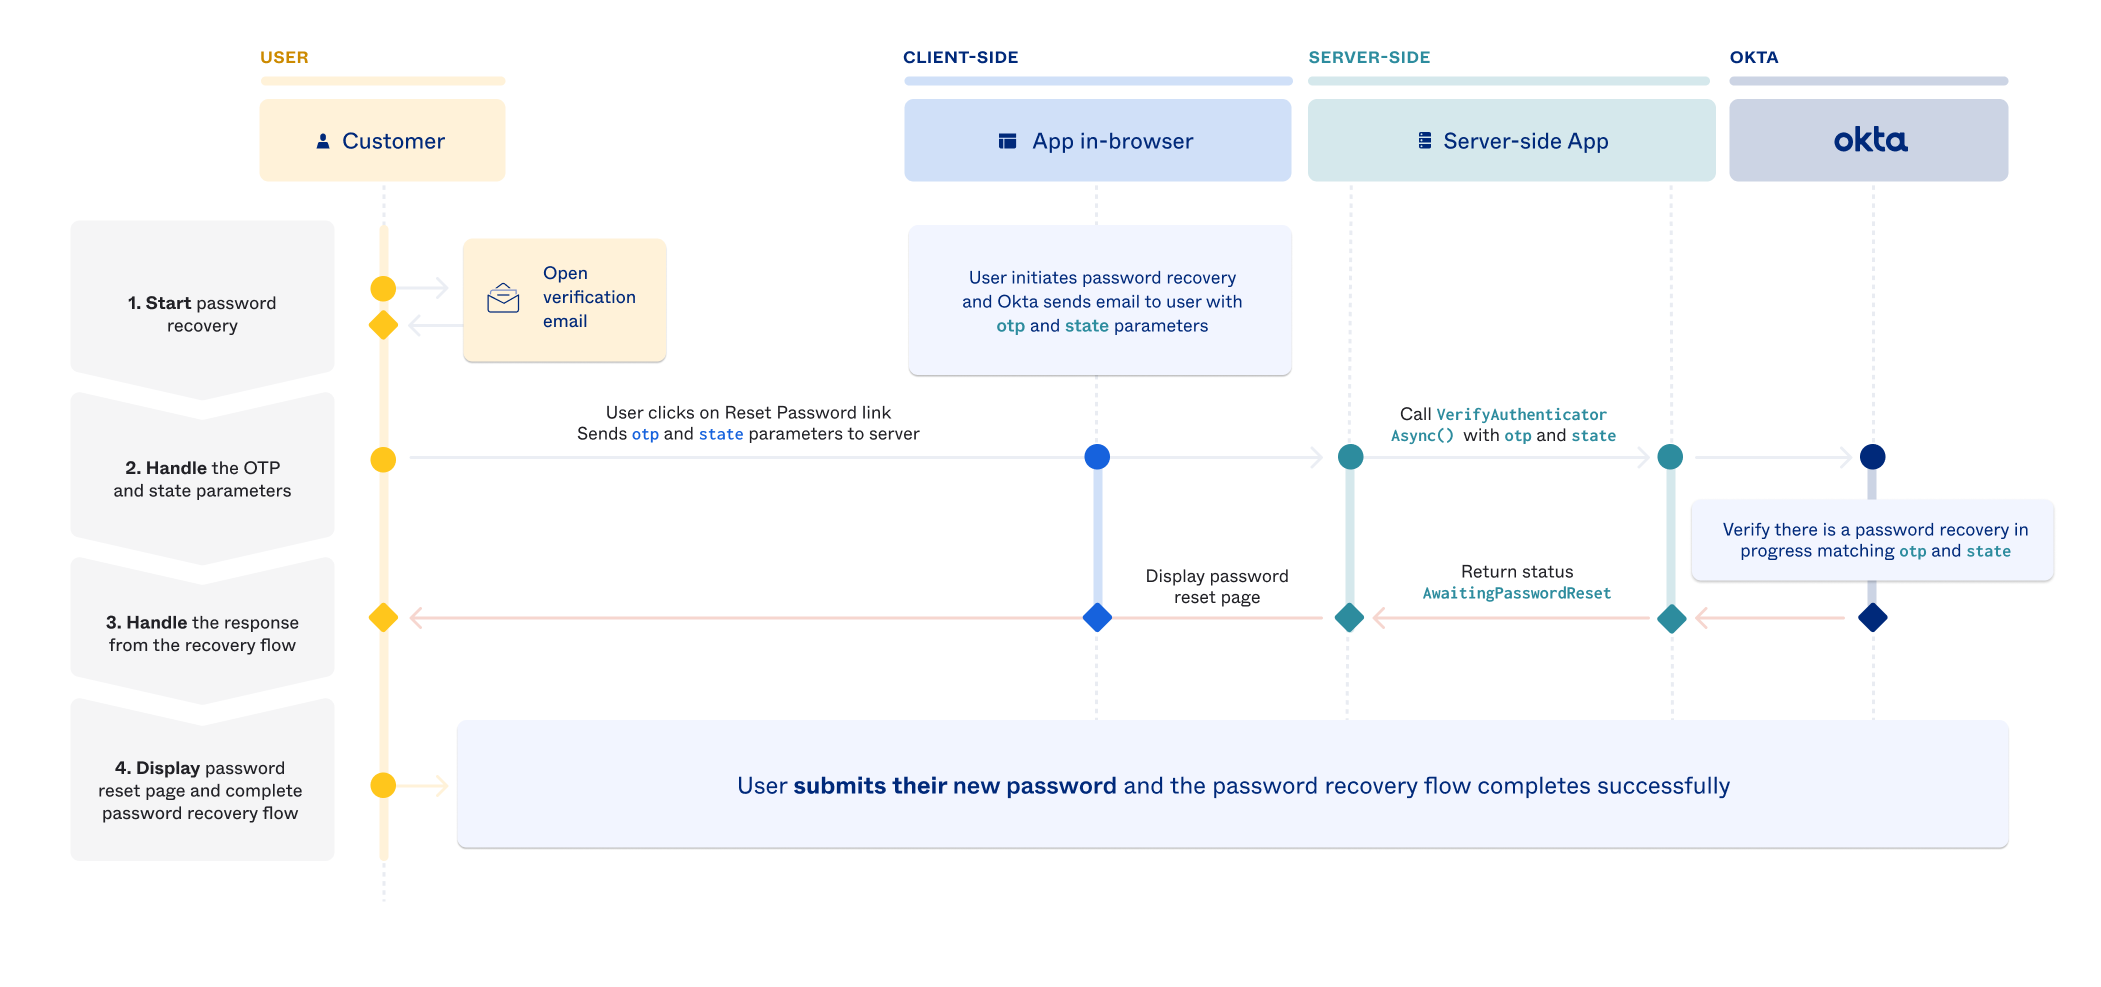 Sequence diagram showing all the steps in the custom password recovery flow using the embedded SDK